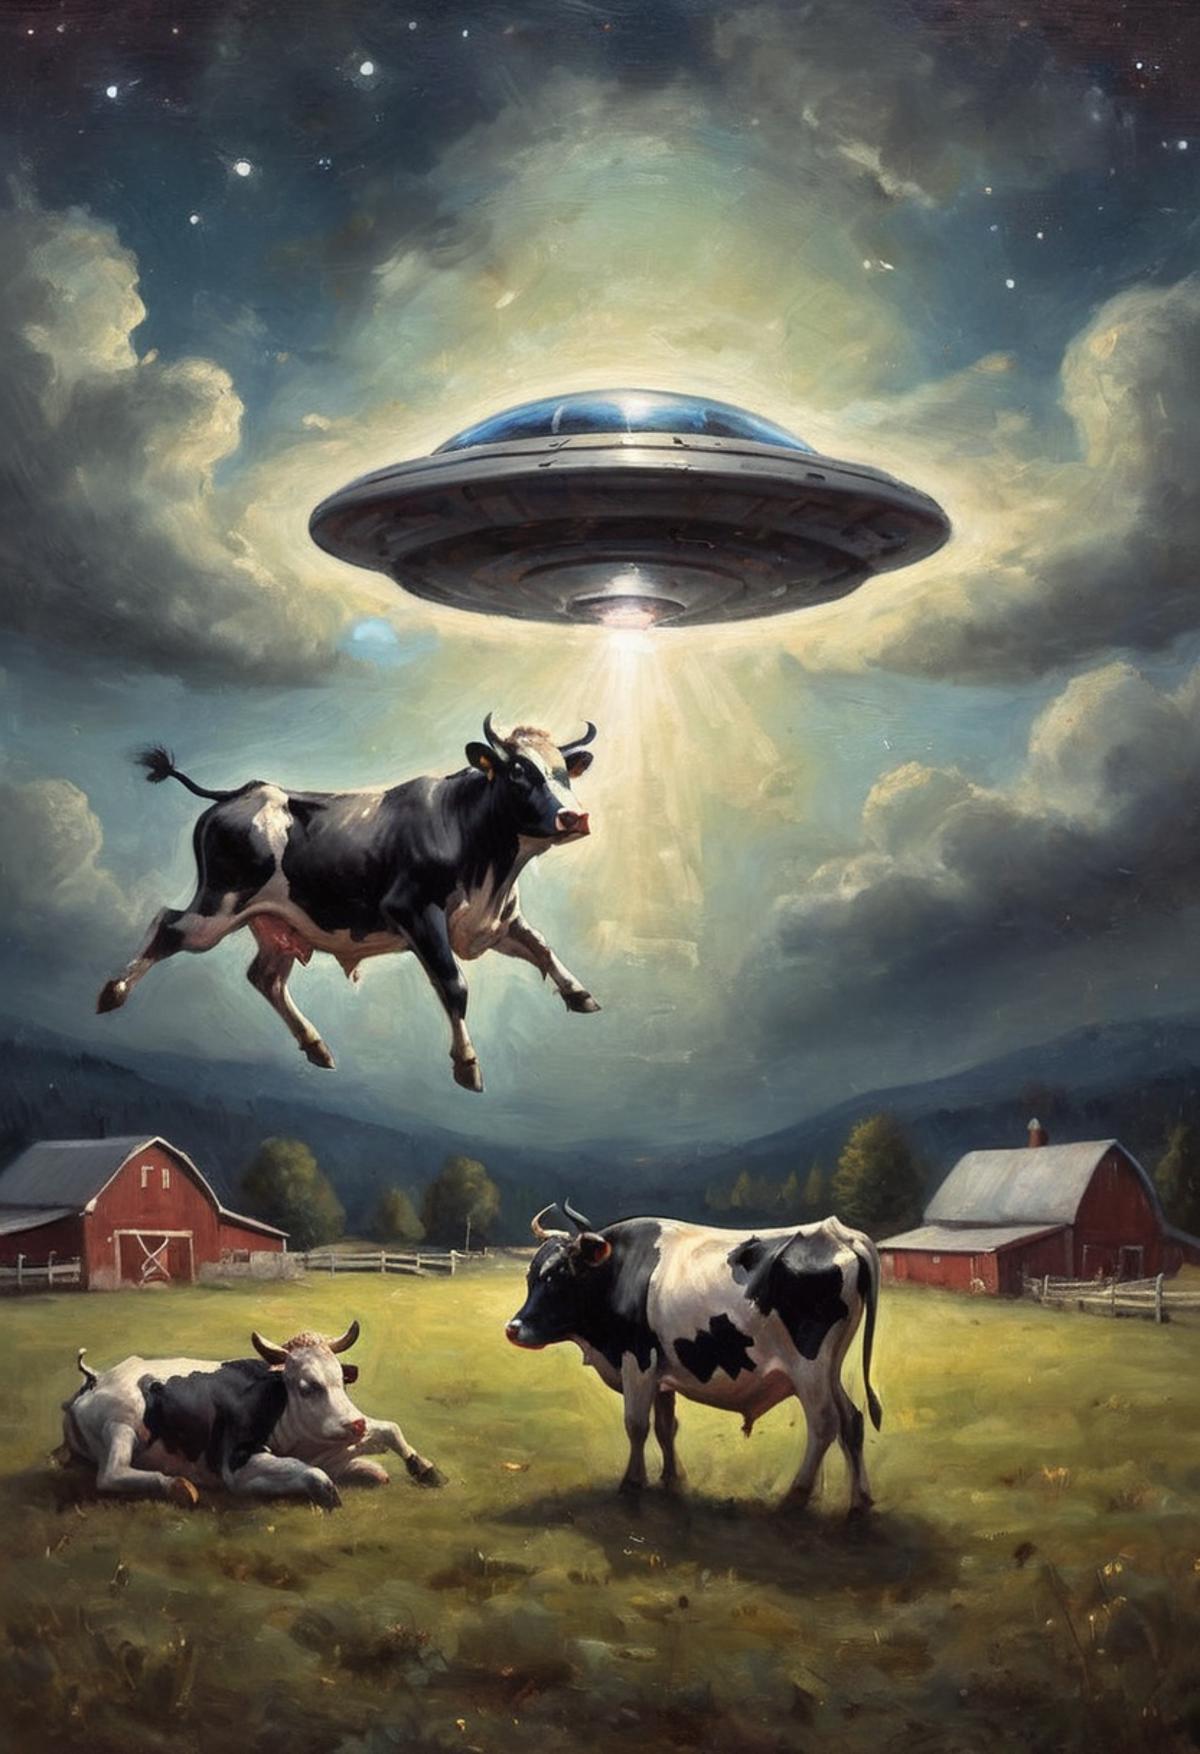 A painting of a cow and a bull standing next to each other while a flying saucer is in the background.